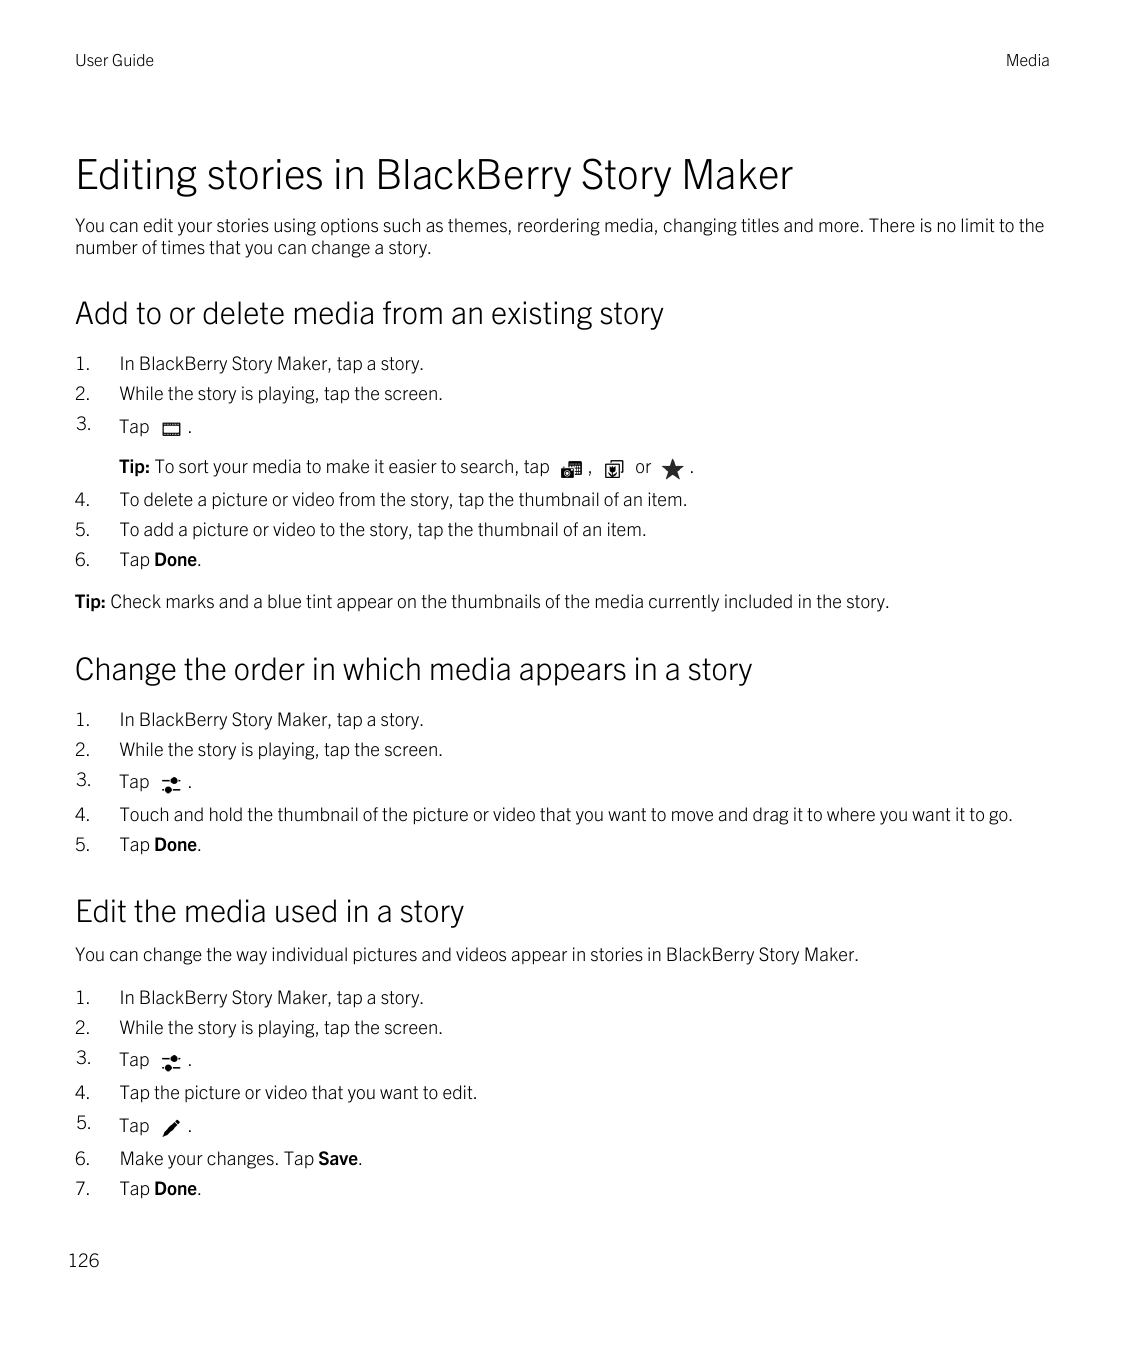 User GuideMediaEditing stories in BlackBerry Story MakerYou can edit your stories using options such as themes, reordering media